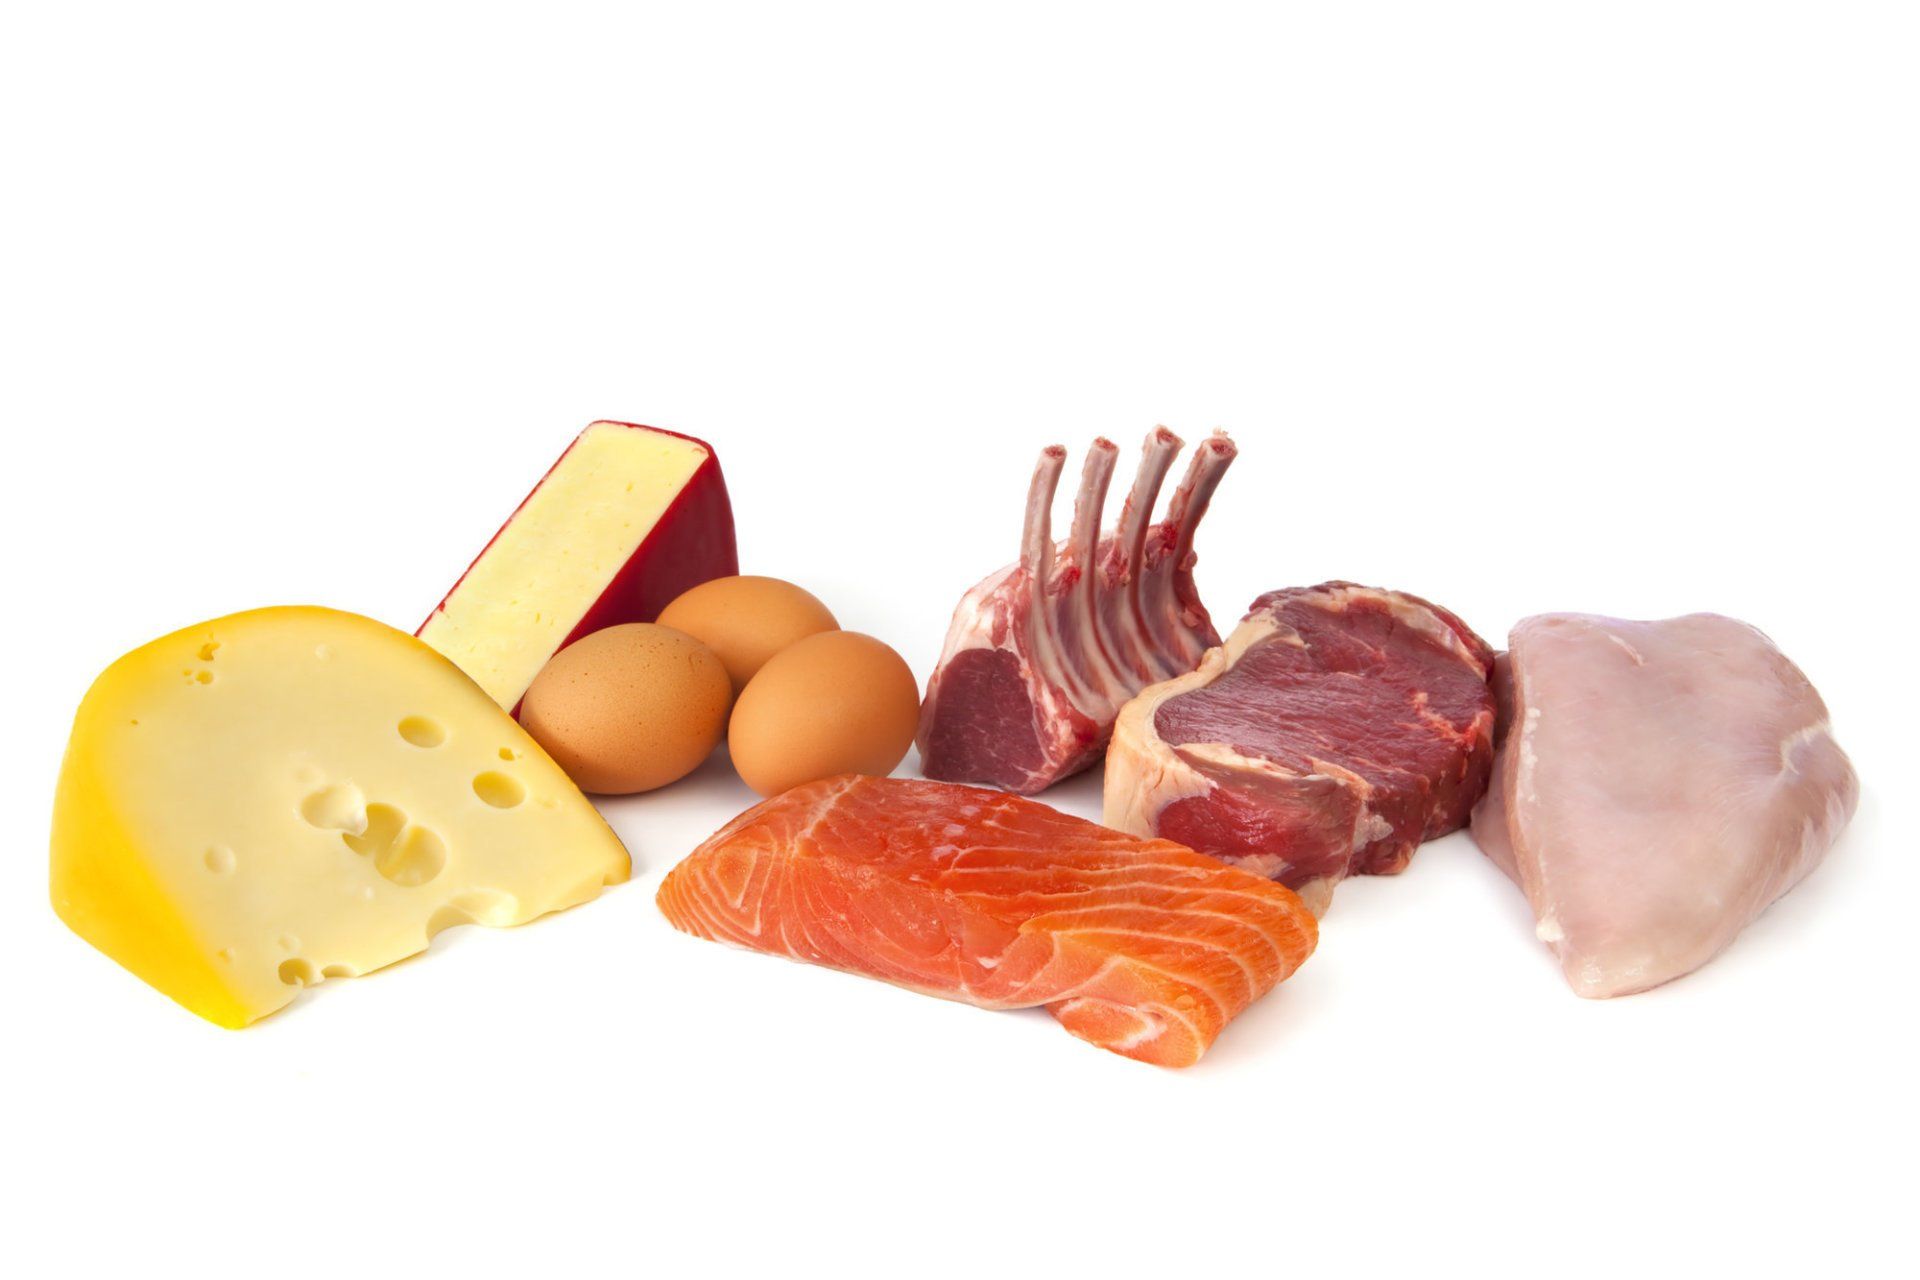 Foods rich in protein, including cheese, eggs, fish, lamb, beef and chicken